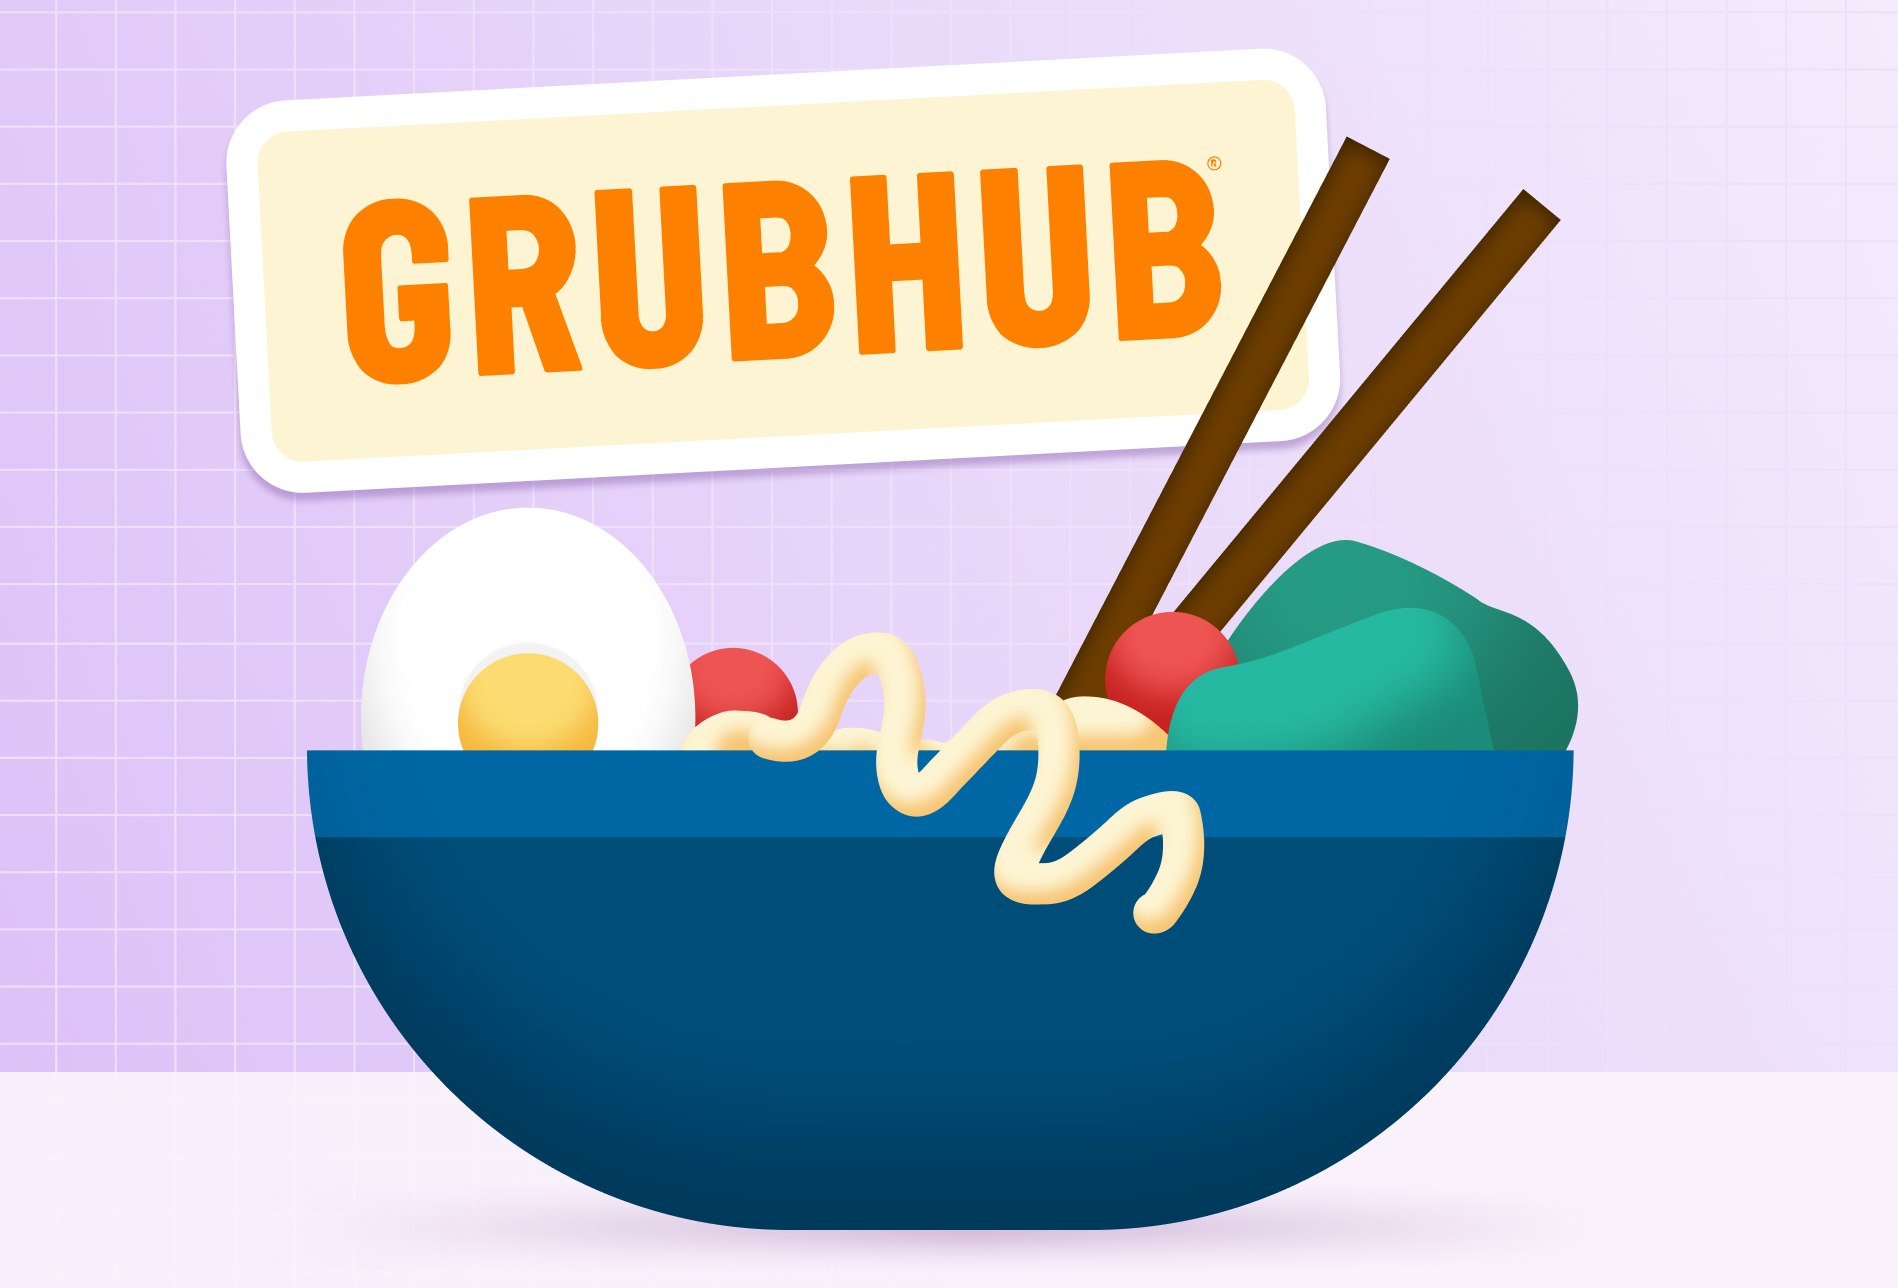 How to Get Free Delivery on Grubhub: 9 Smart Ways